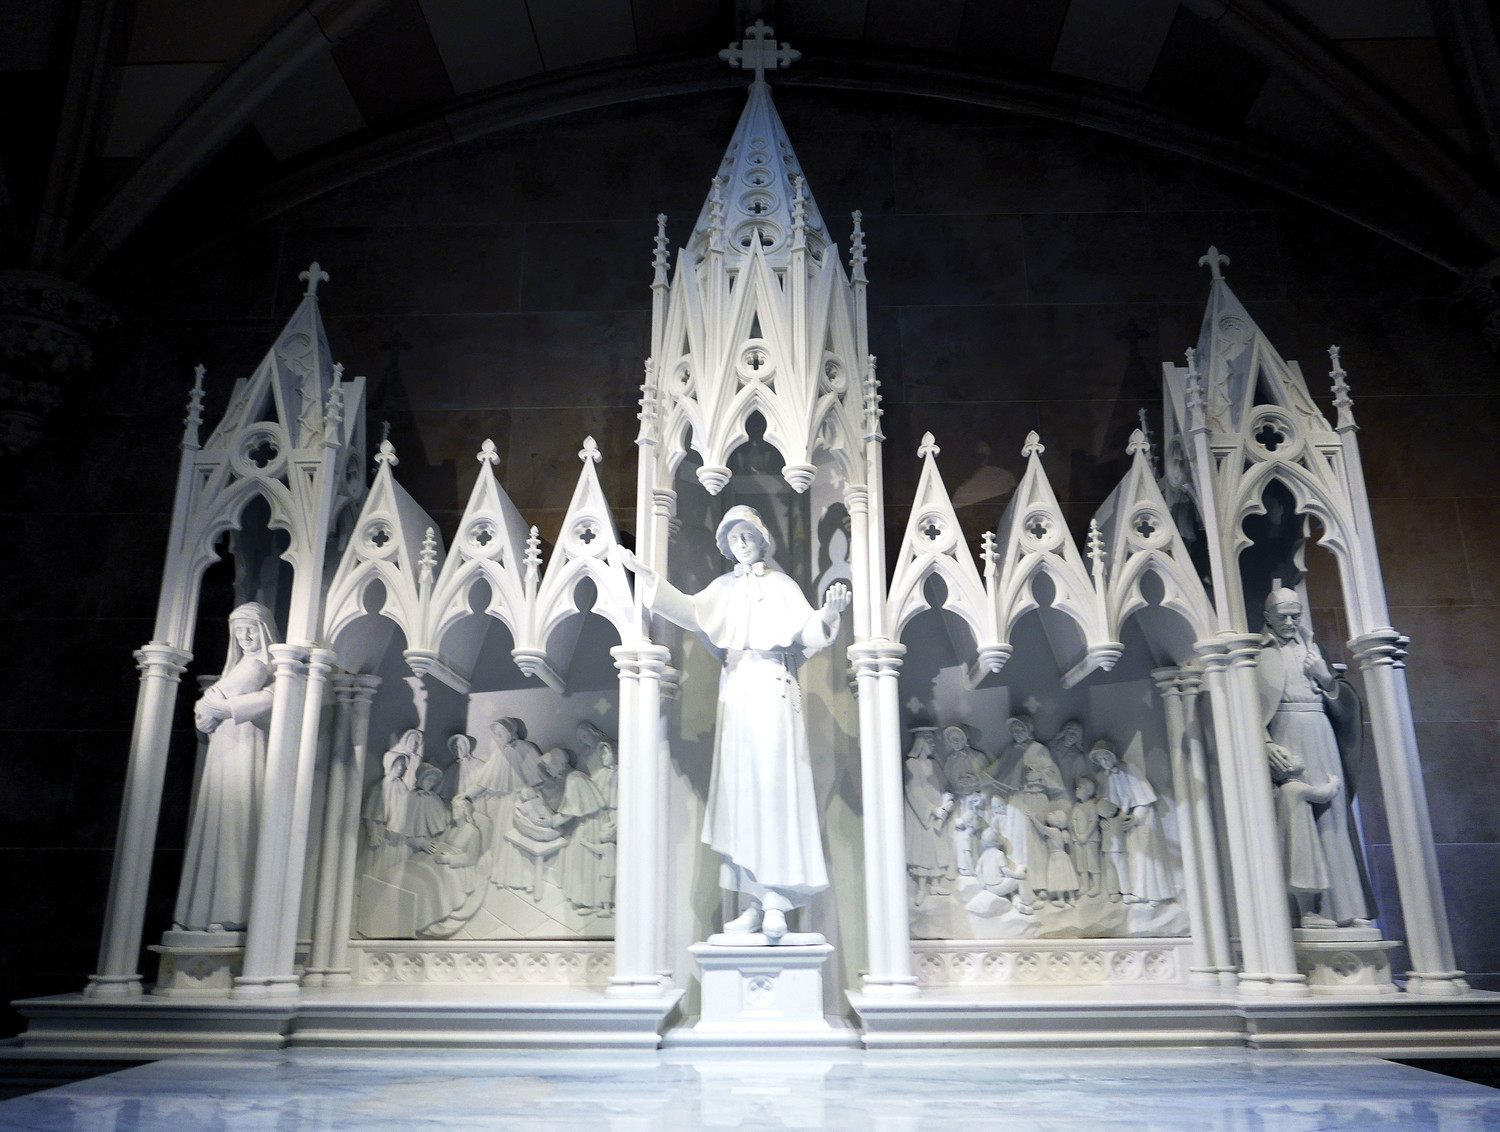 The 19th-century altar of the new St. Elizabeth Ann Seton Shrine inside St. Patrick's Cathedral was designed by the cathedral’s original architect, James Renwick Jr., and anchors the statuary and high relief panels of the late Sister Margaret “Peggie” Beaudette, S.C., a devoted teacher and renowned sculptor whose artwork for the shrine was her last commission before her death this past March 12. The shrine honors Mother Seton and the 200 years of service of the Sisters of Charity of New York which she founded.